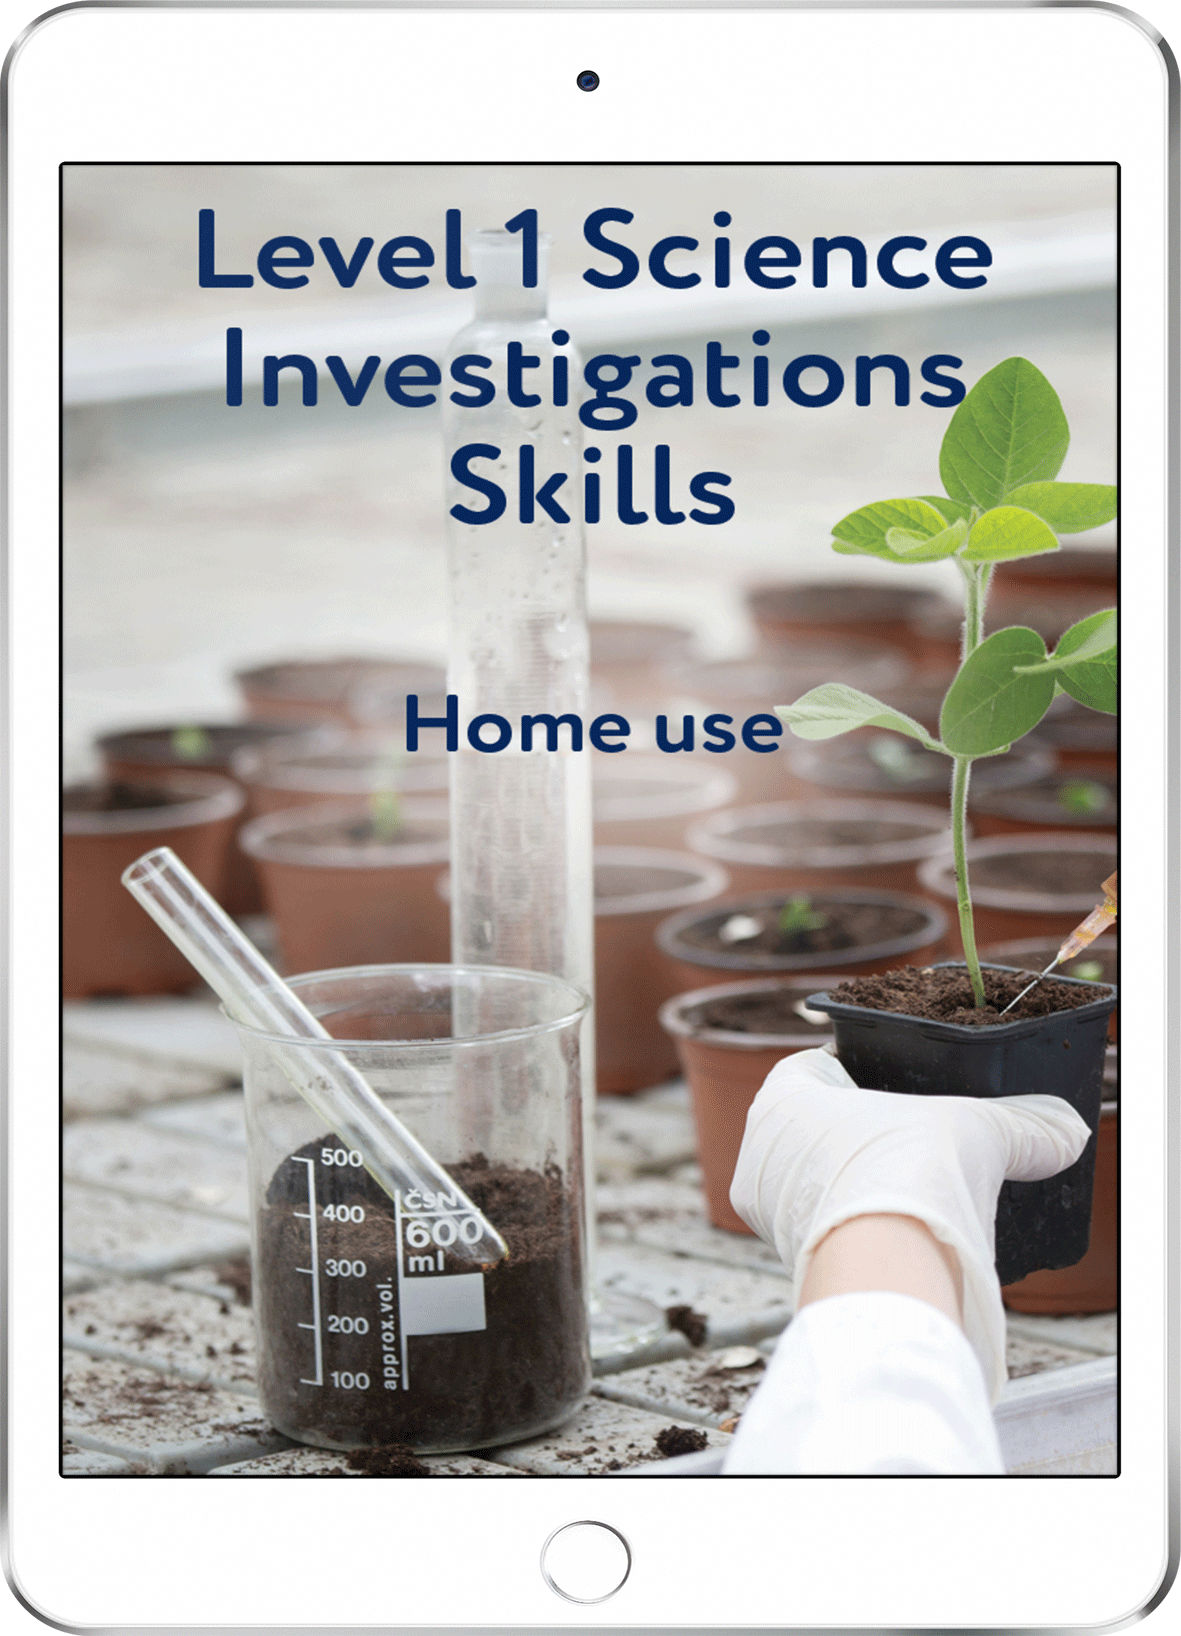 Level 1 Science Investigations Skills - Home Use